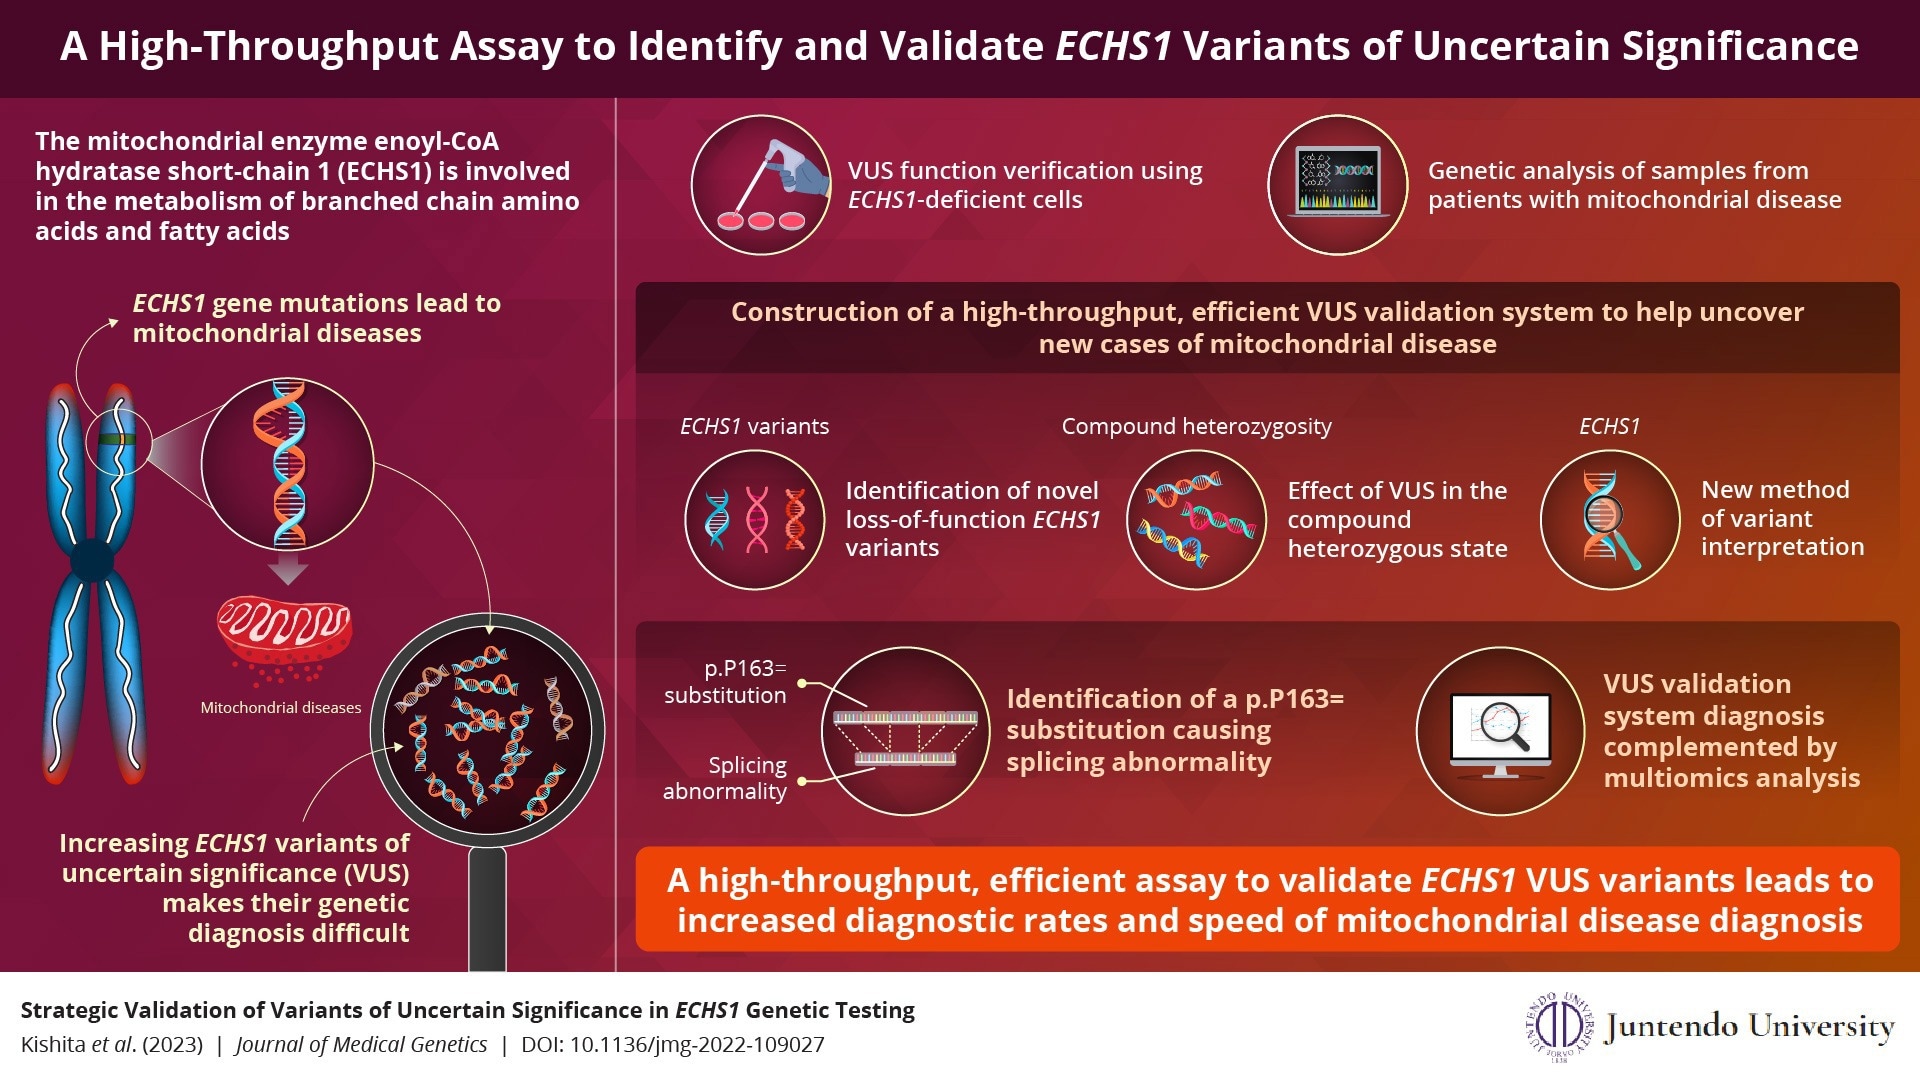 A High-Throughput Assay for Identifying and Validating ECHS1 Enzyme Genetic Variants